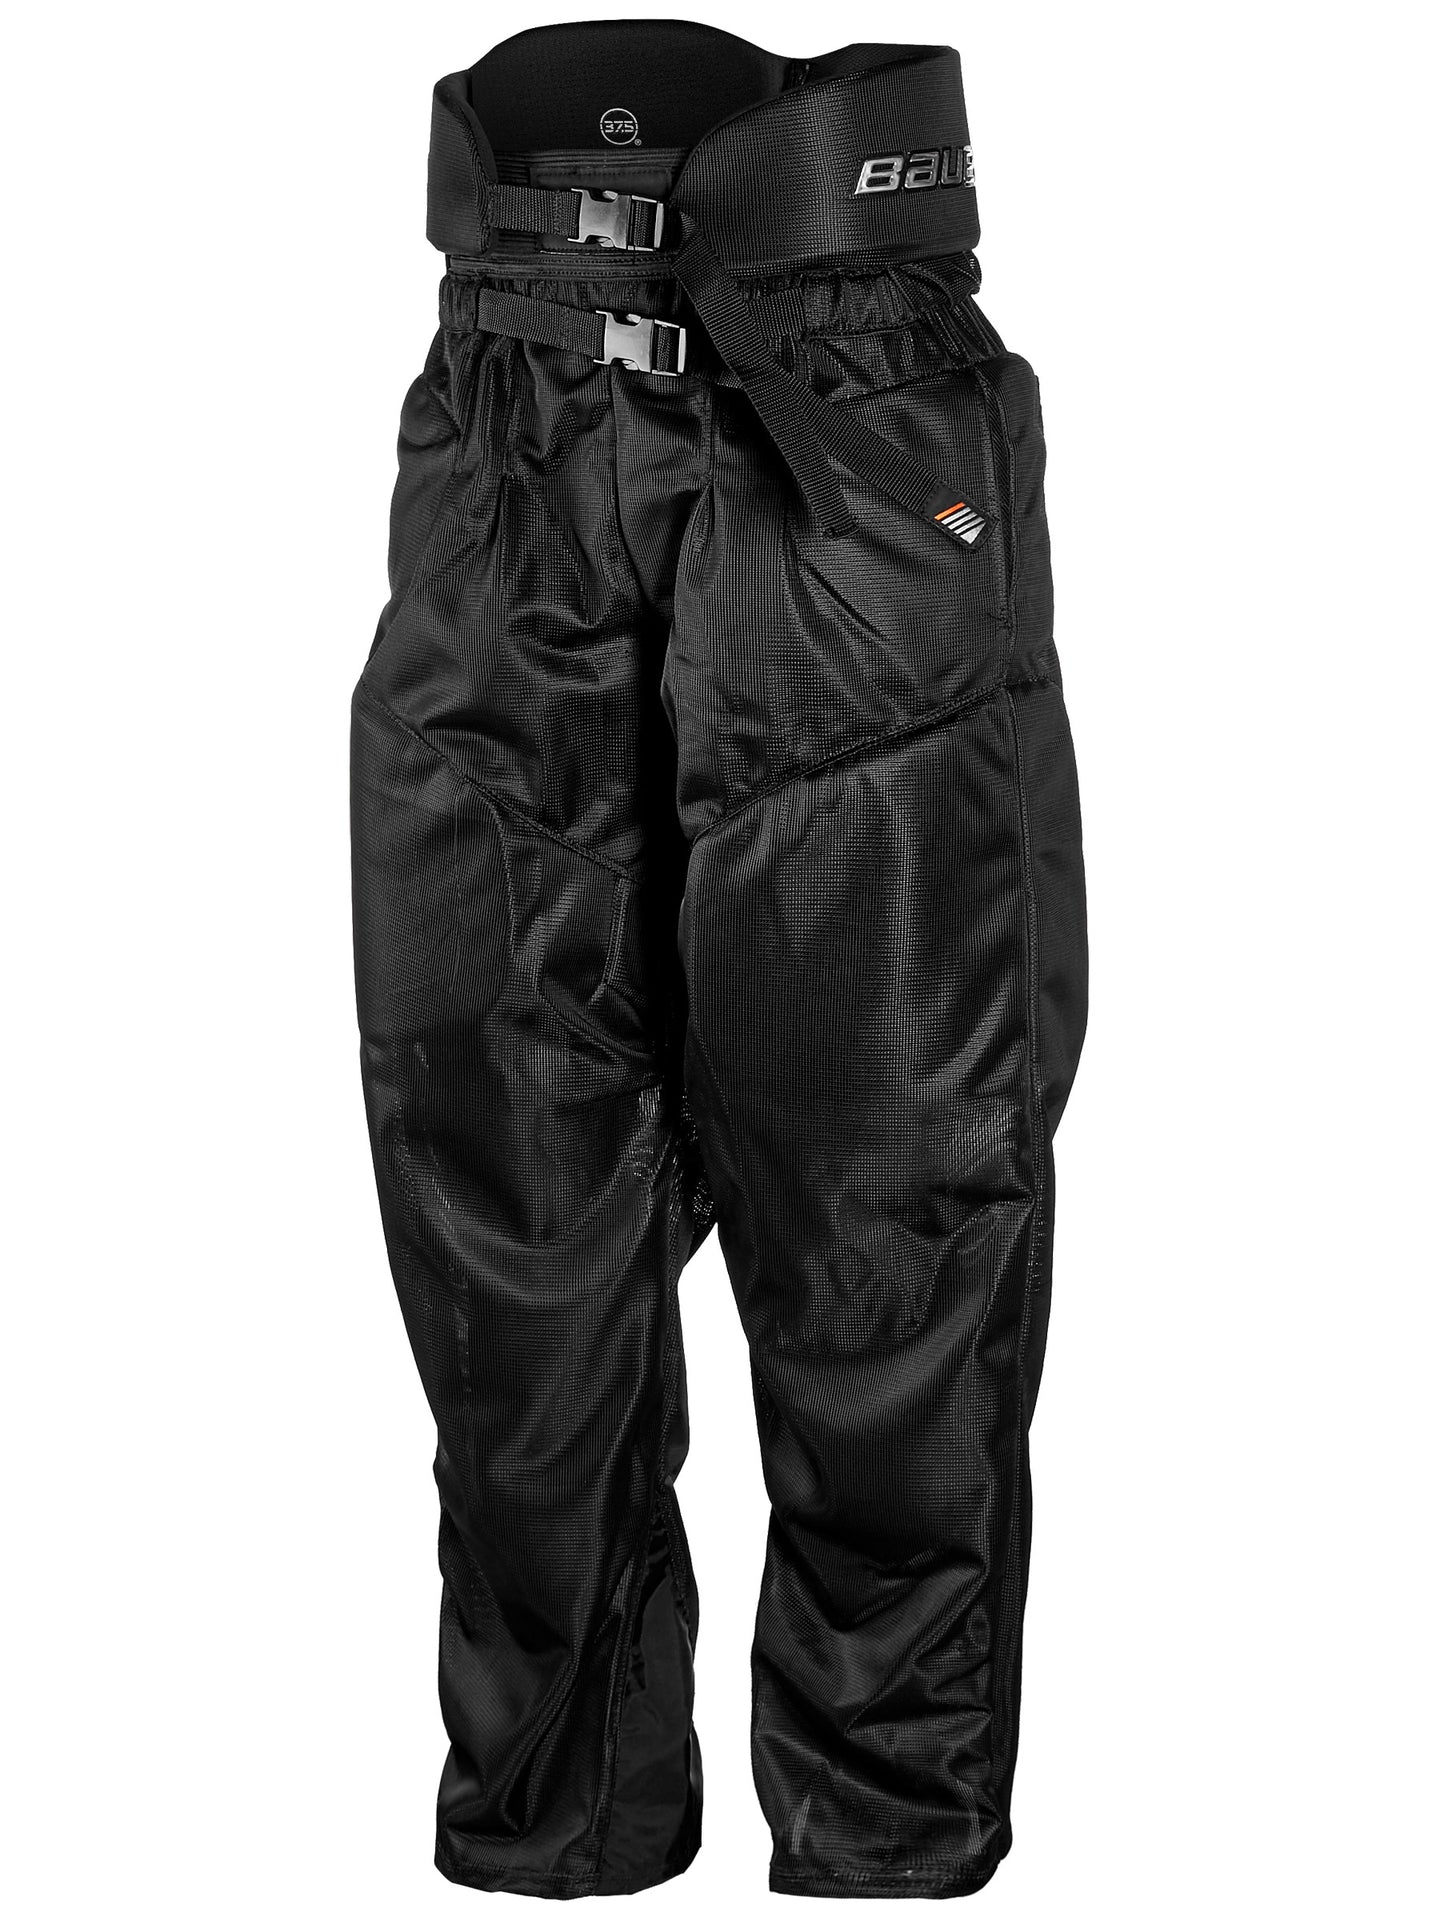 Bauer Official's Pant w/ Integrated Girdle